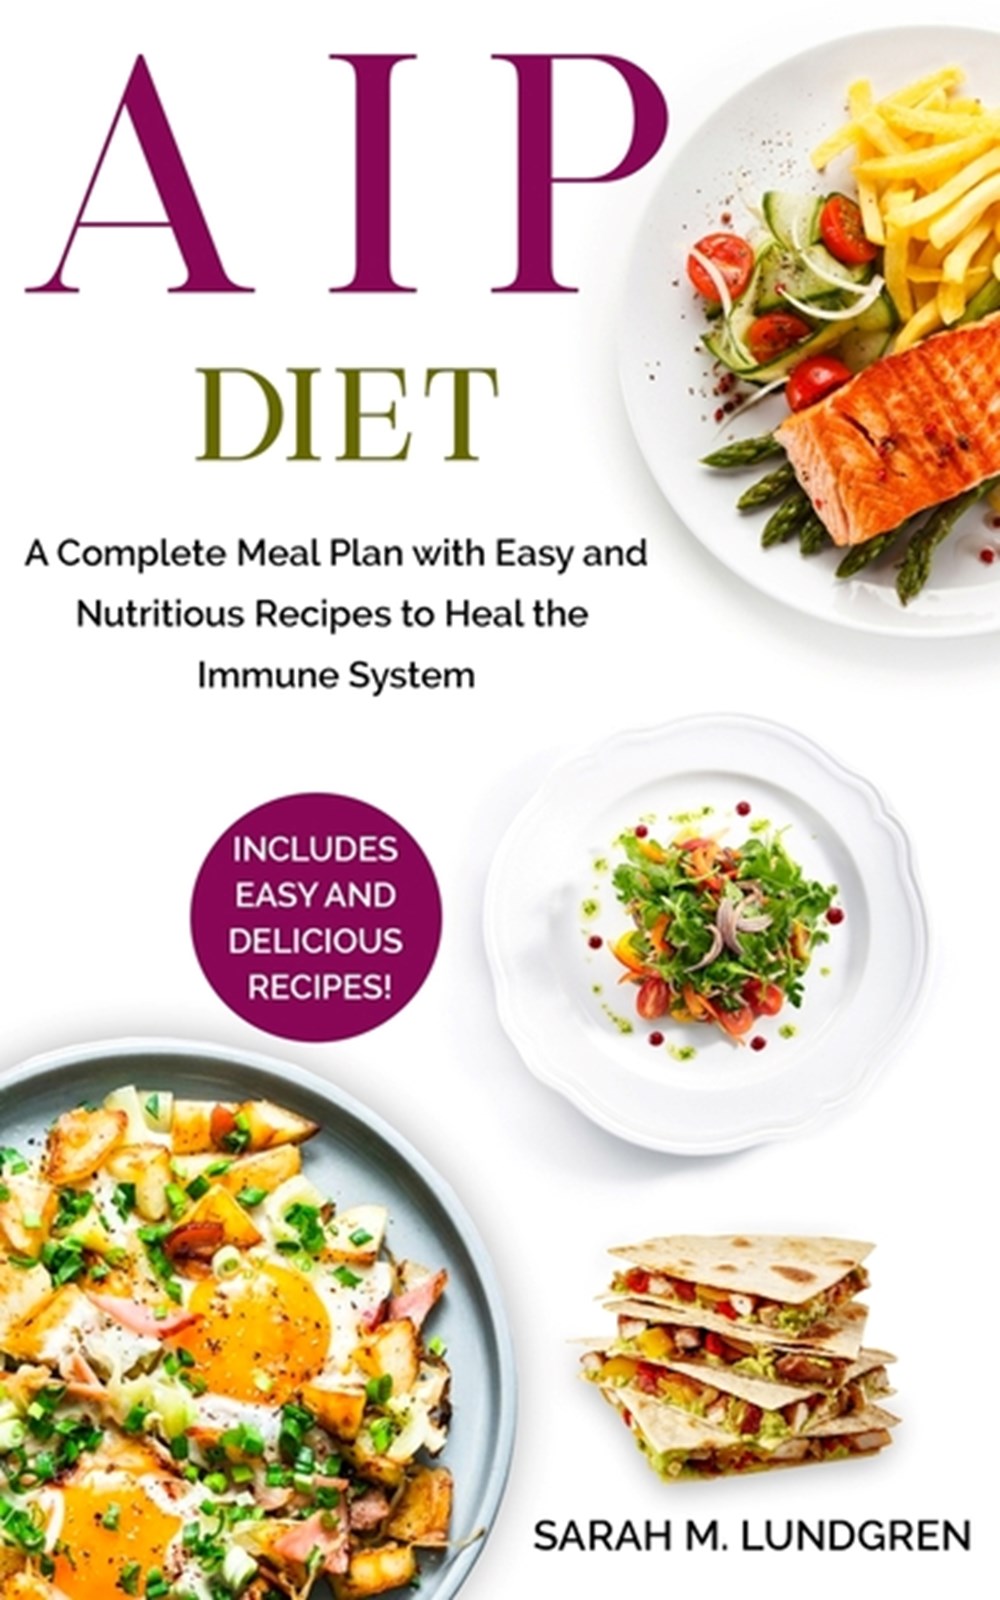 Buy AIP Diet: A Complete Meal Plan with Easy and Nutritious Recipes to